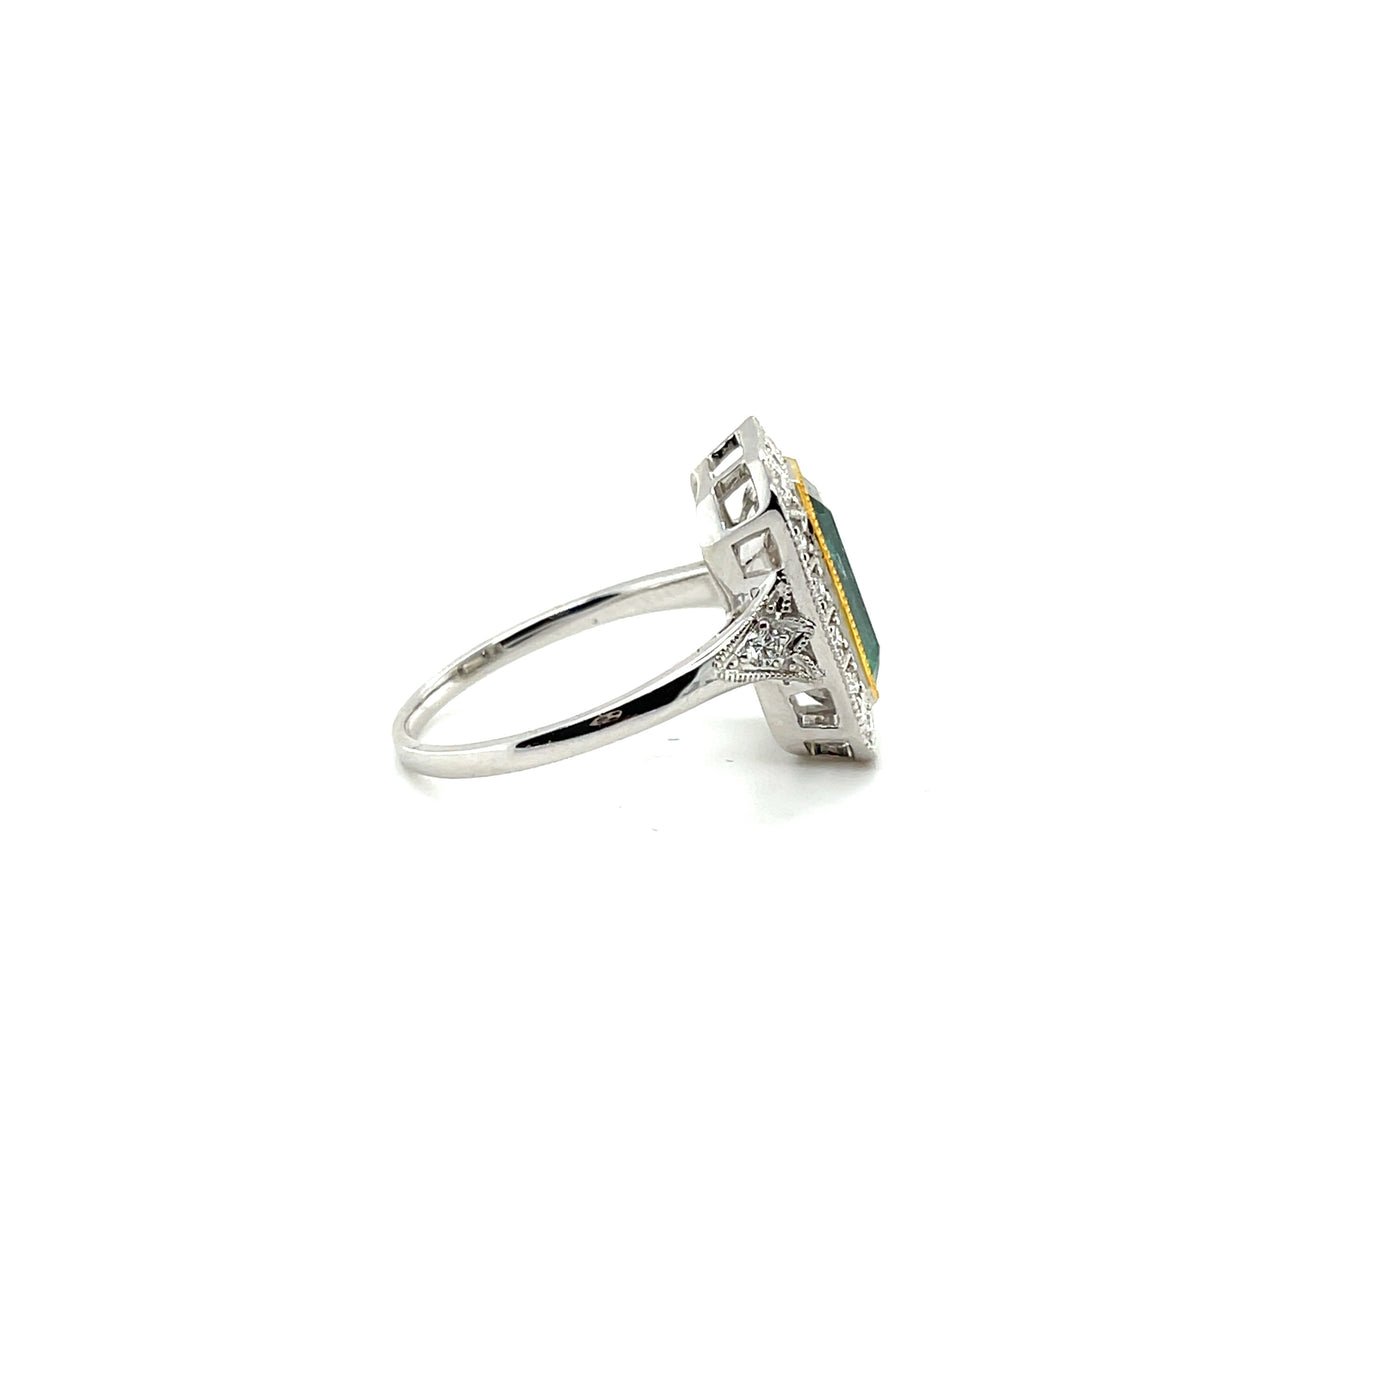 18ct white gold Colombian emerald and diamond dress ring